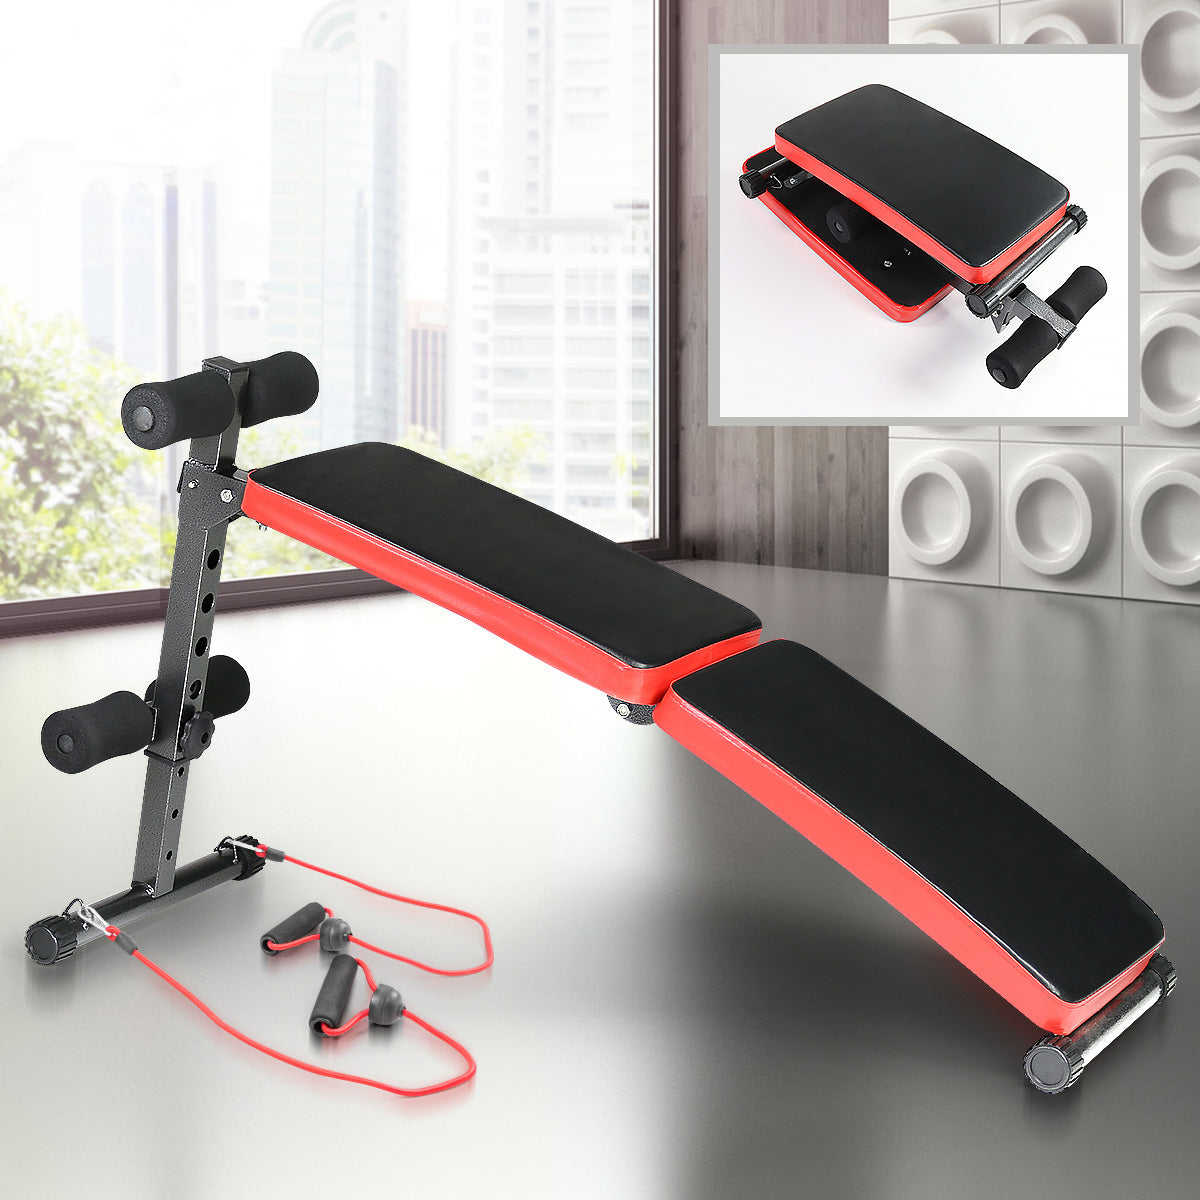 Powertrain Inclined Sit up bench with Resistance bands